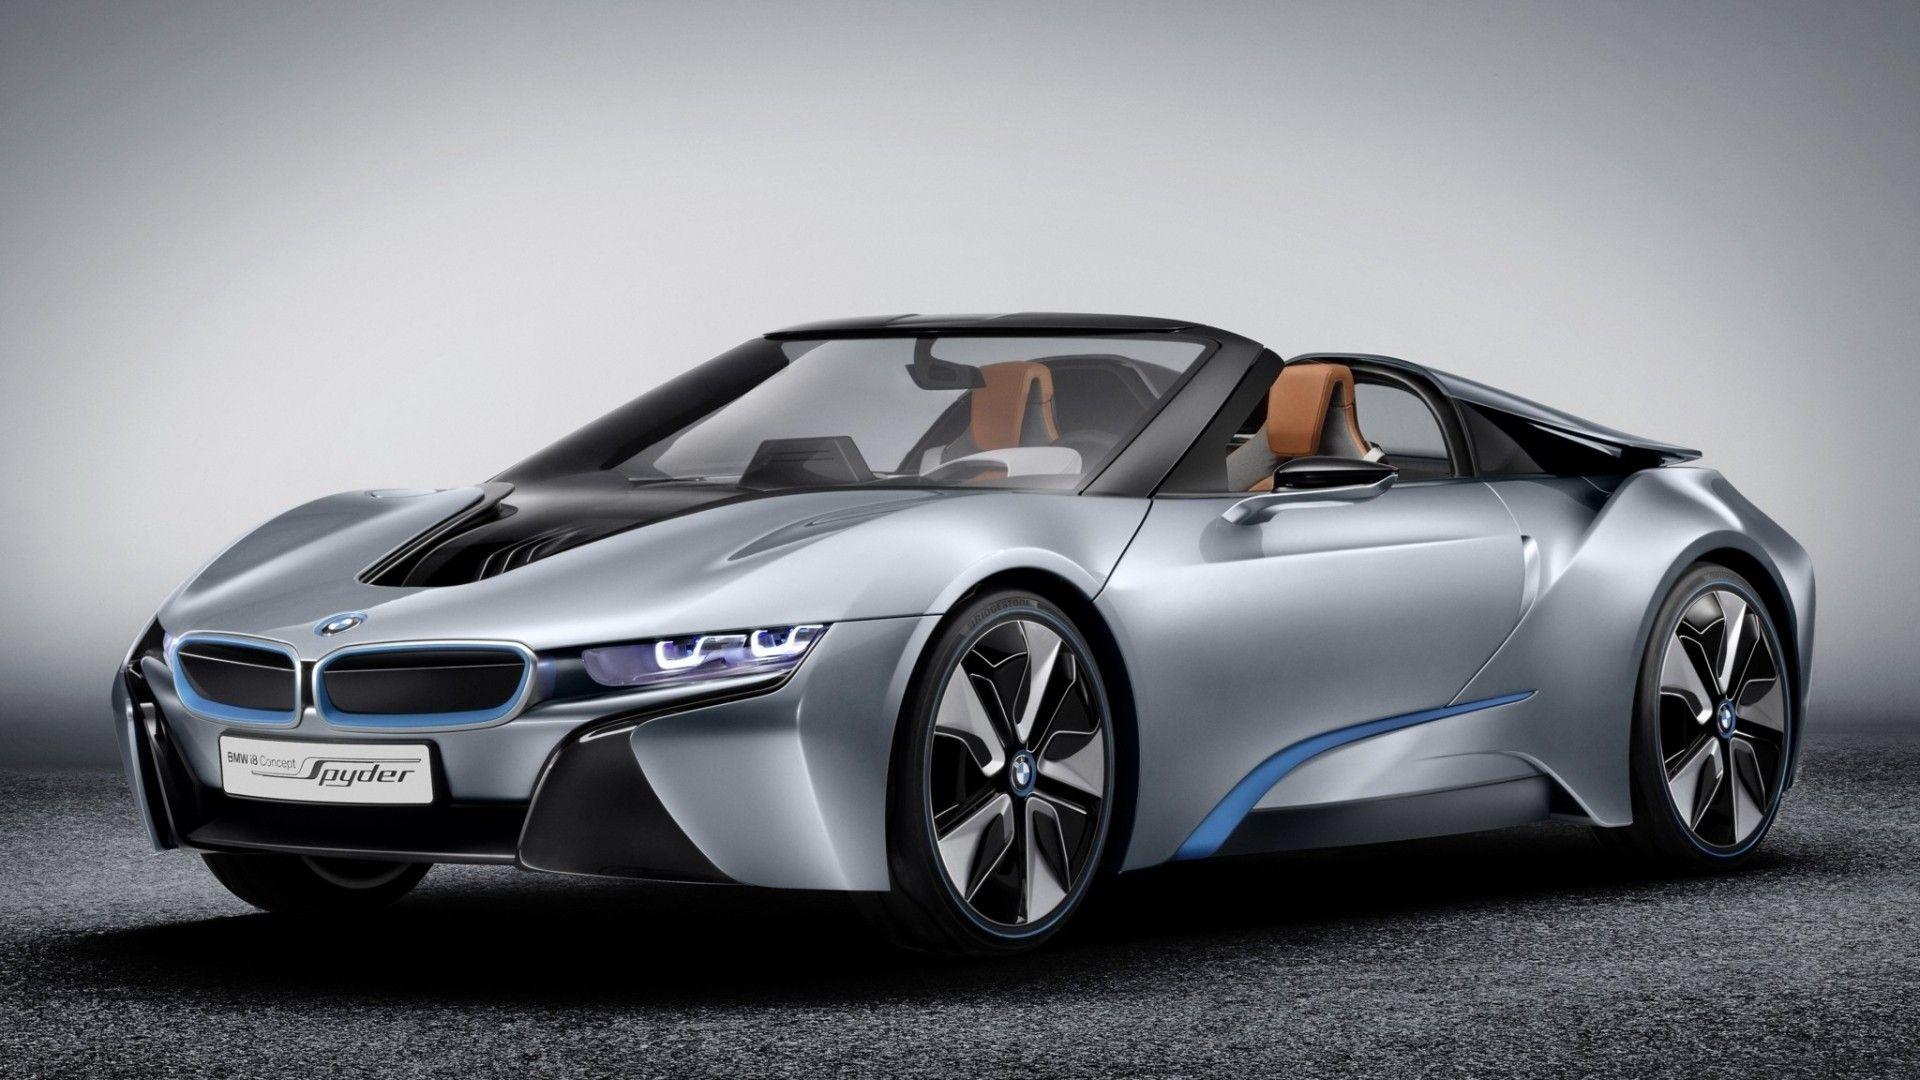 Desktop Bmw Car HD P Daily Pics Update On Hiquality High Resolution